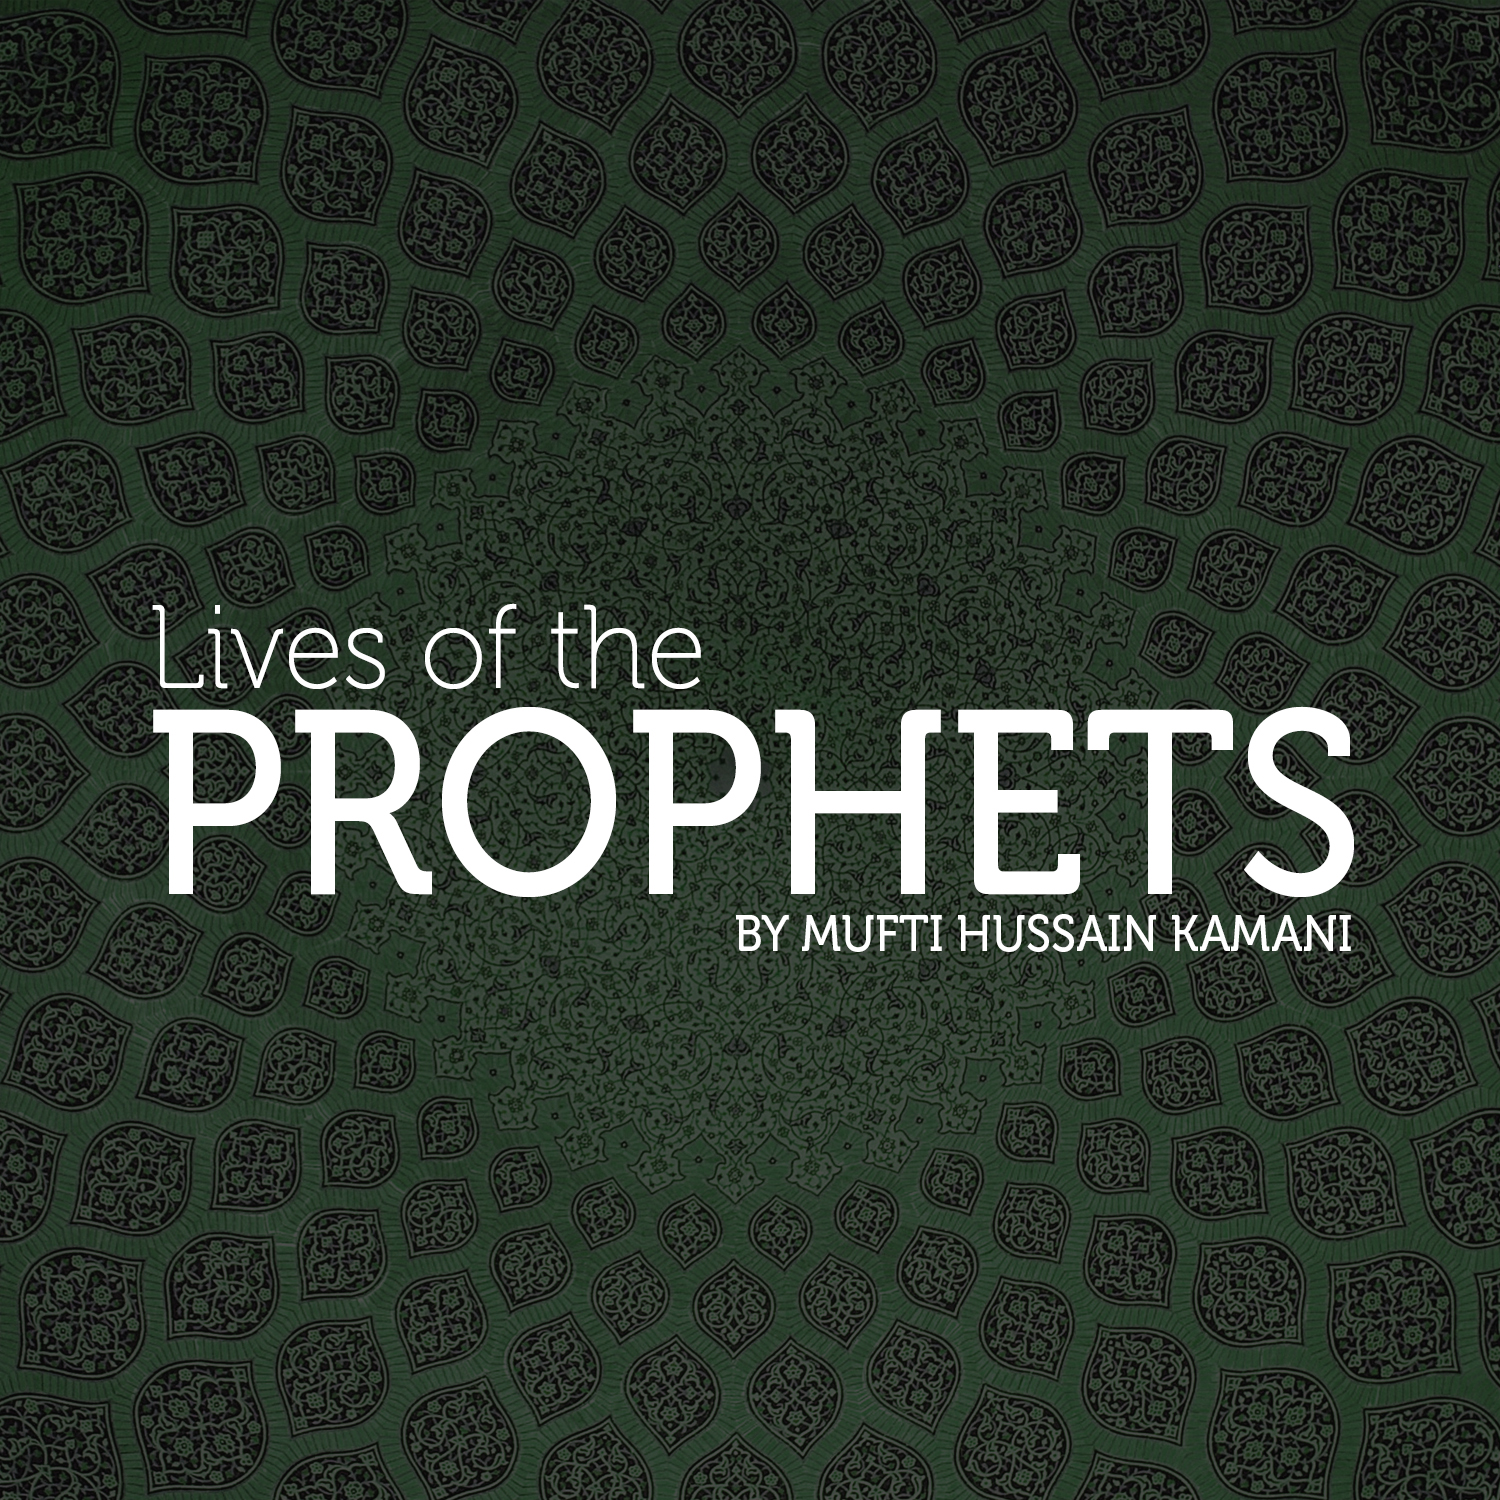 Lives of the Prophets: EP61 – The Life of Prophet Yunus (A) – Part 2